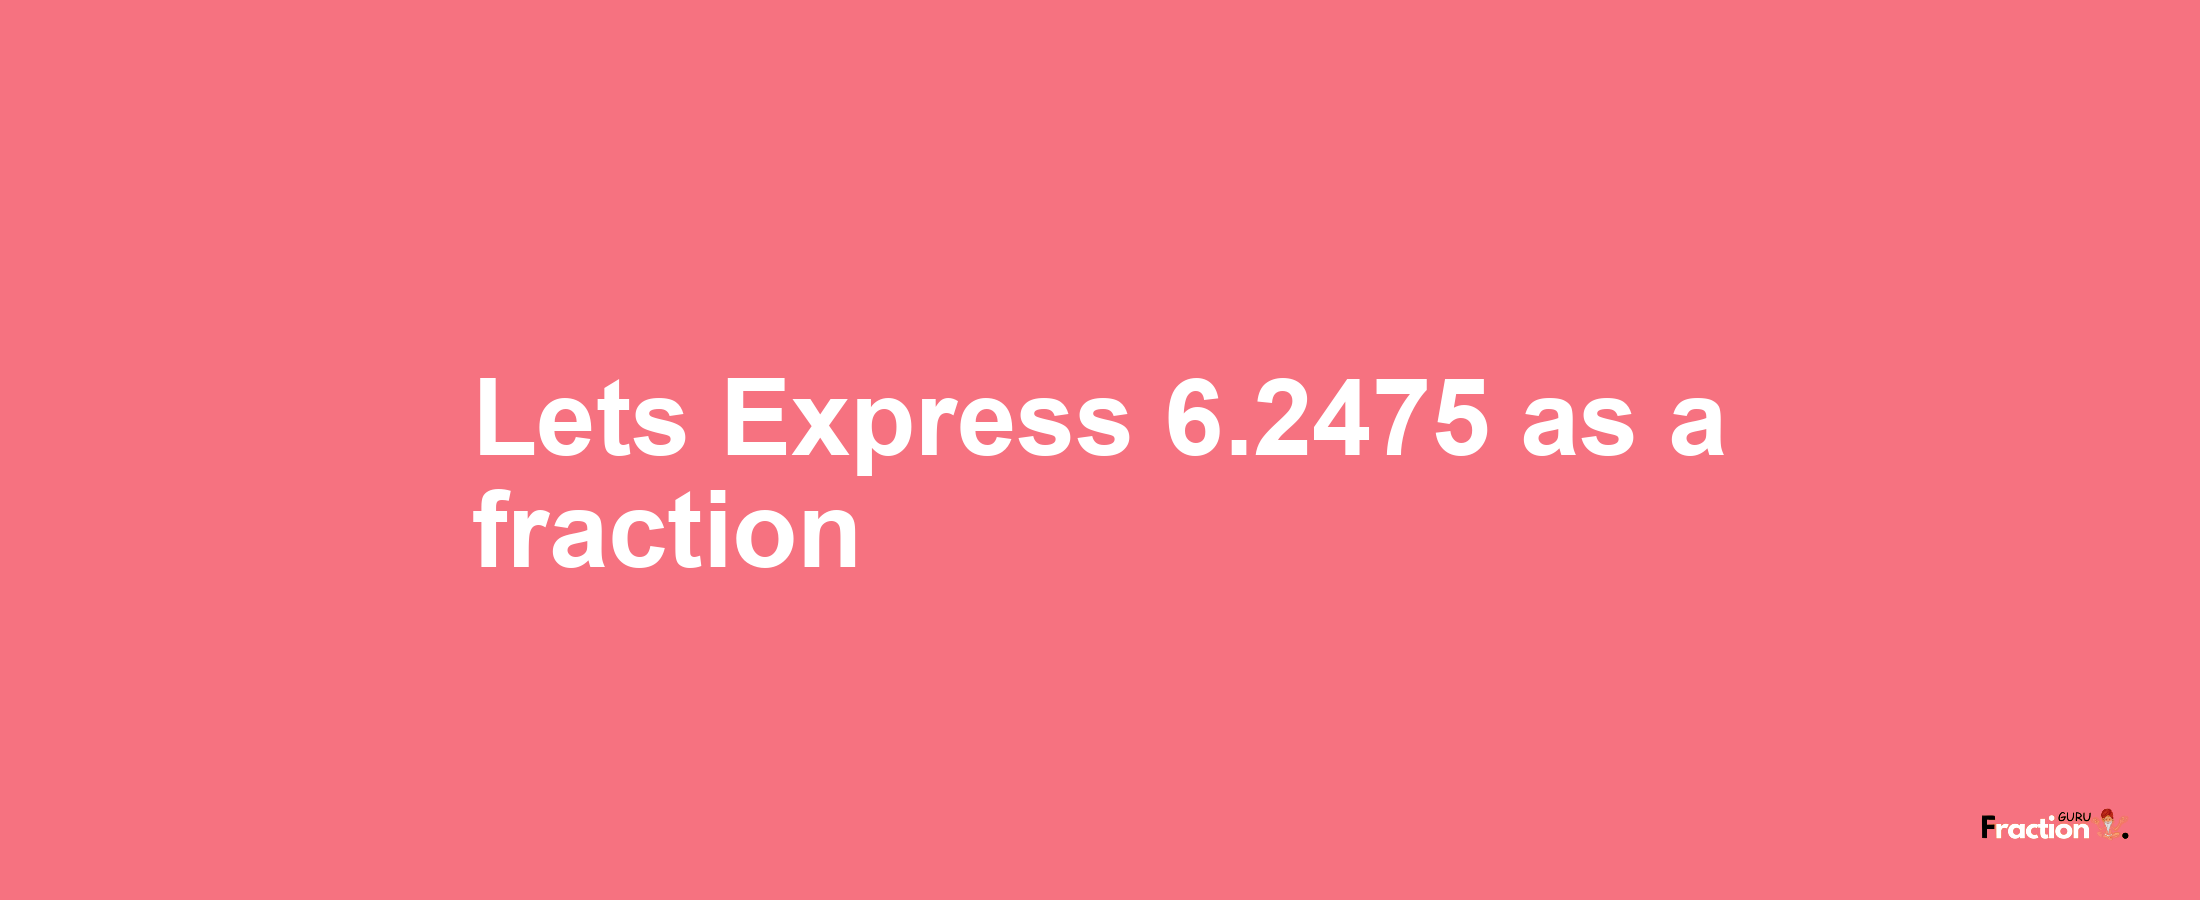 Lets Express 6.2475 as afraction